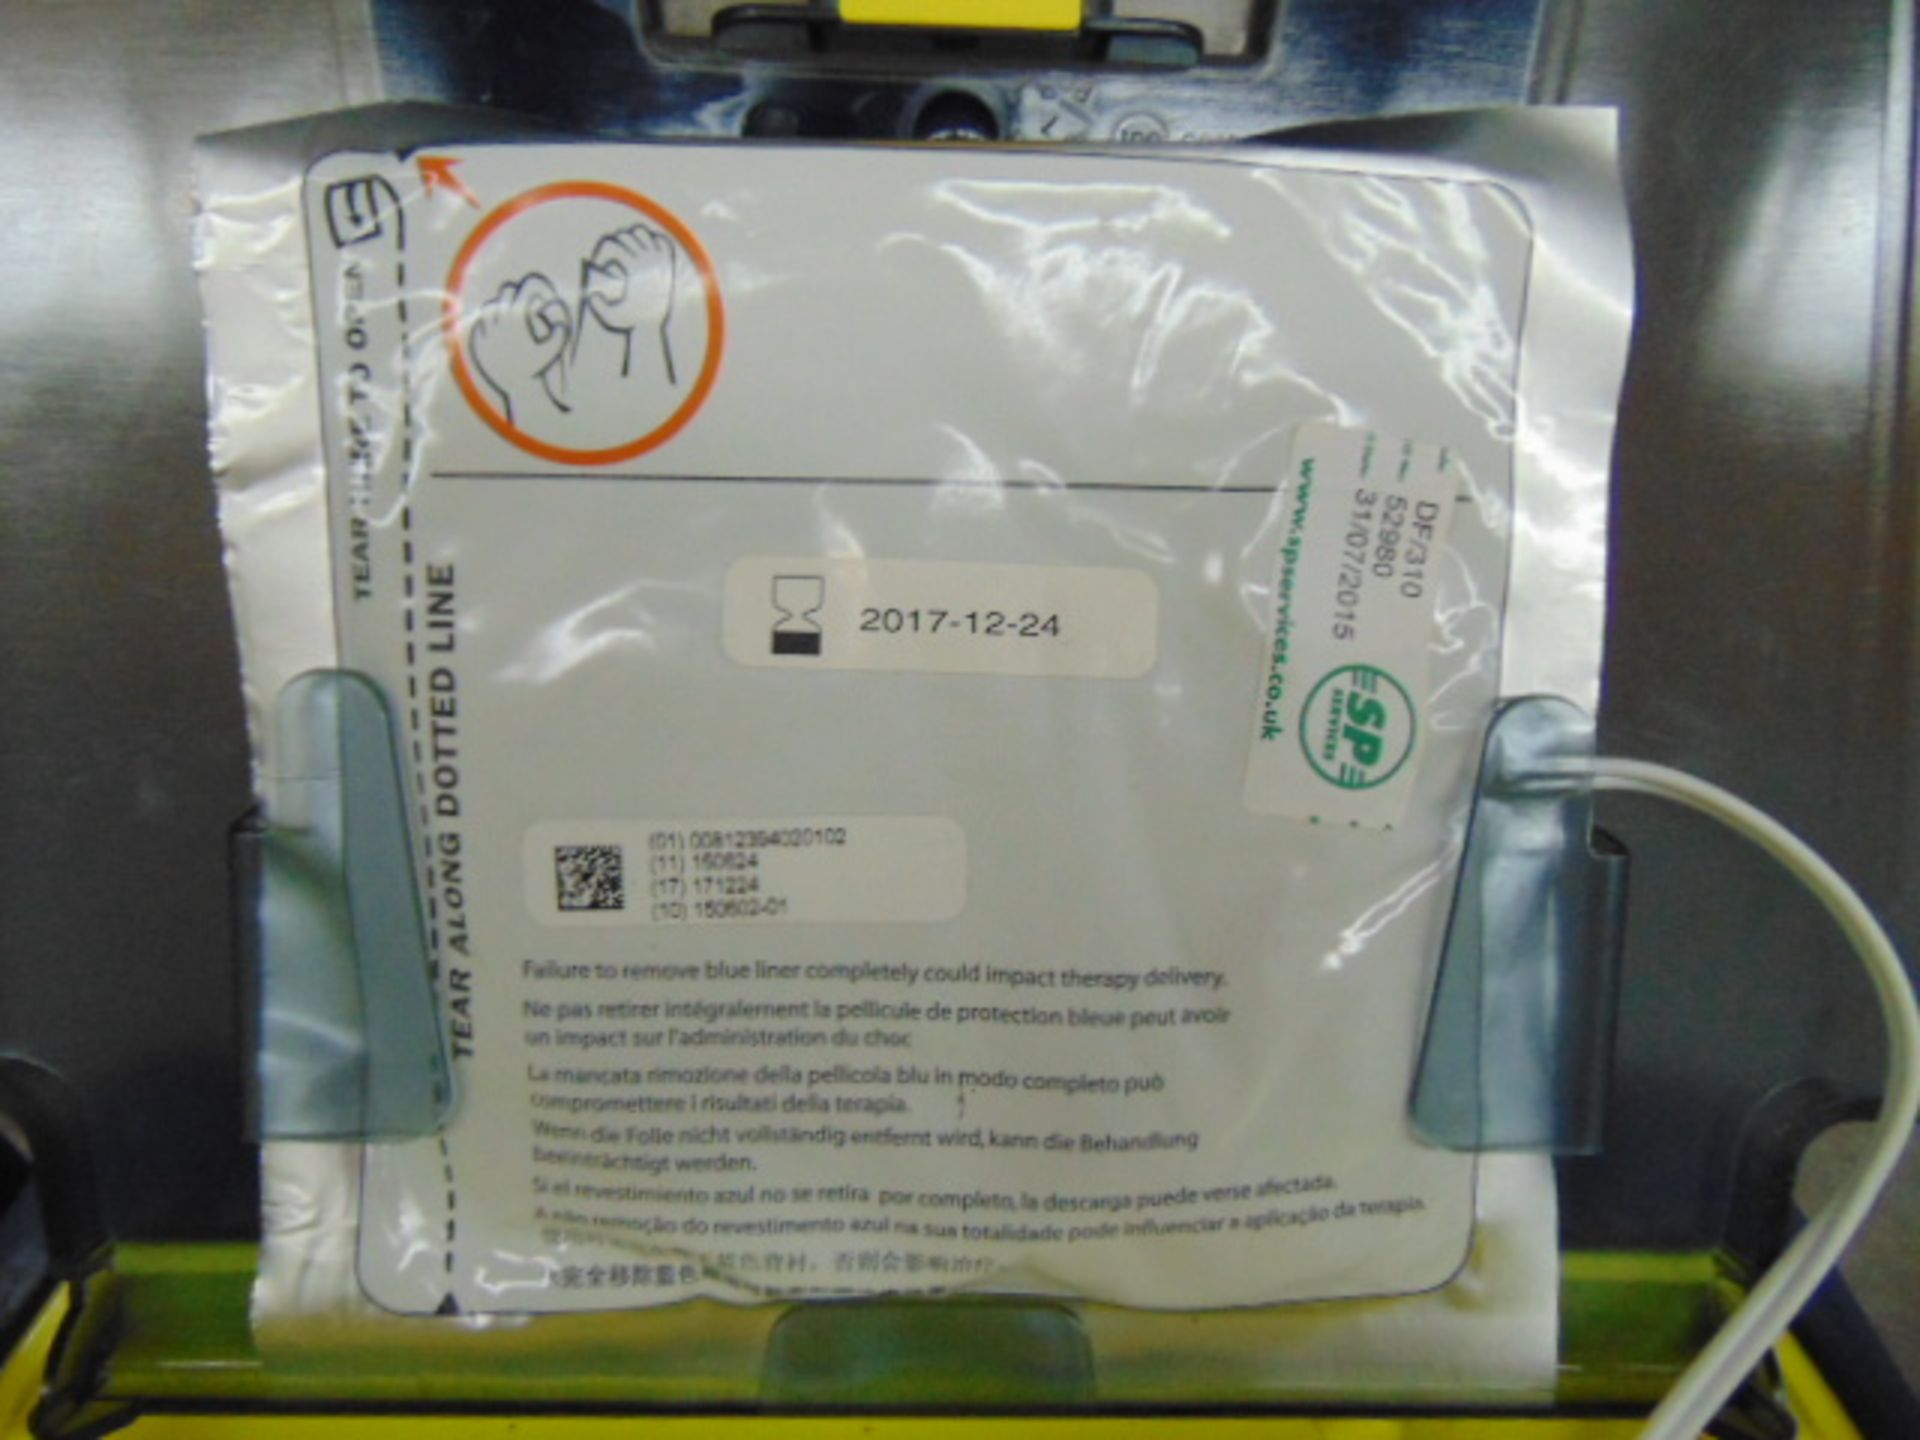 2 x Cardiac Science Powerheart G3 Automatic AED Automatic External Defribrillators - Image 8 of 12